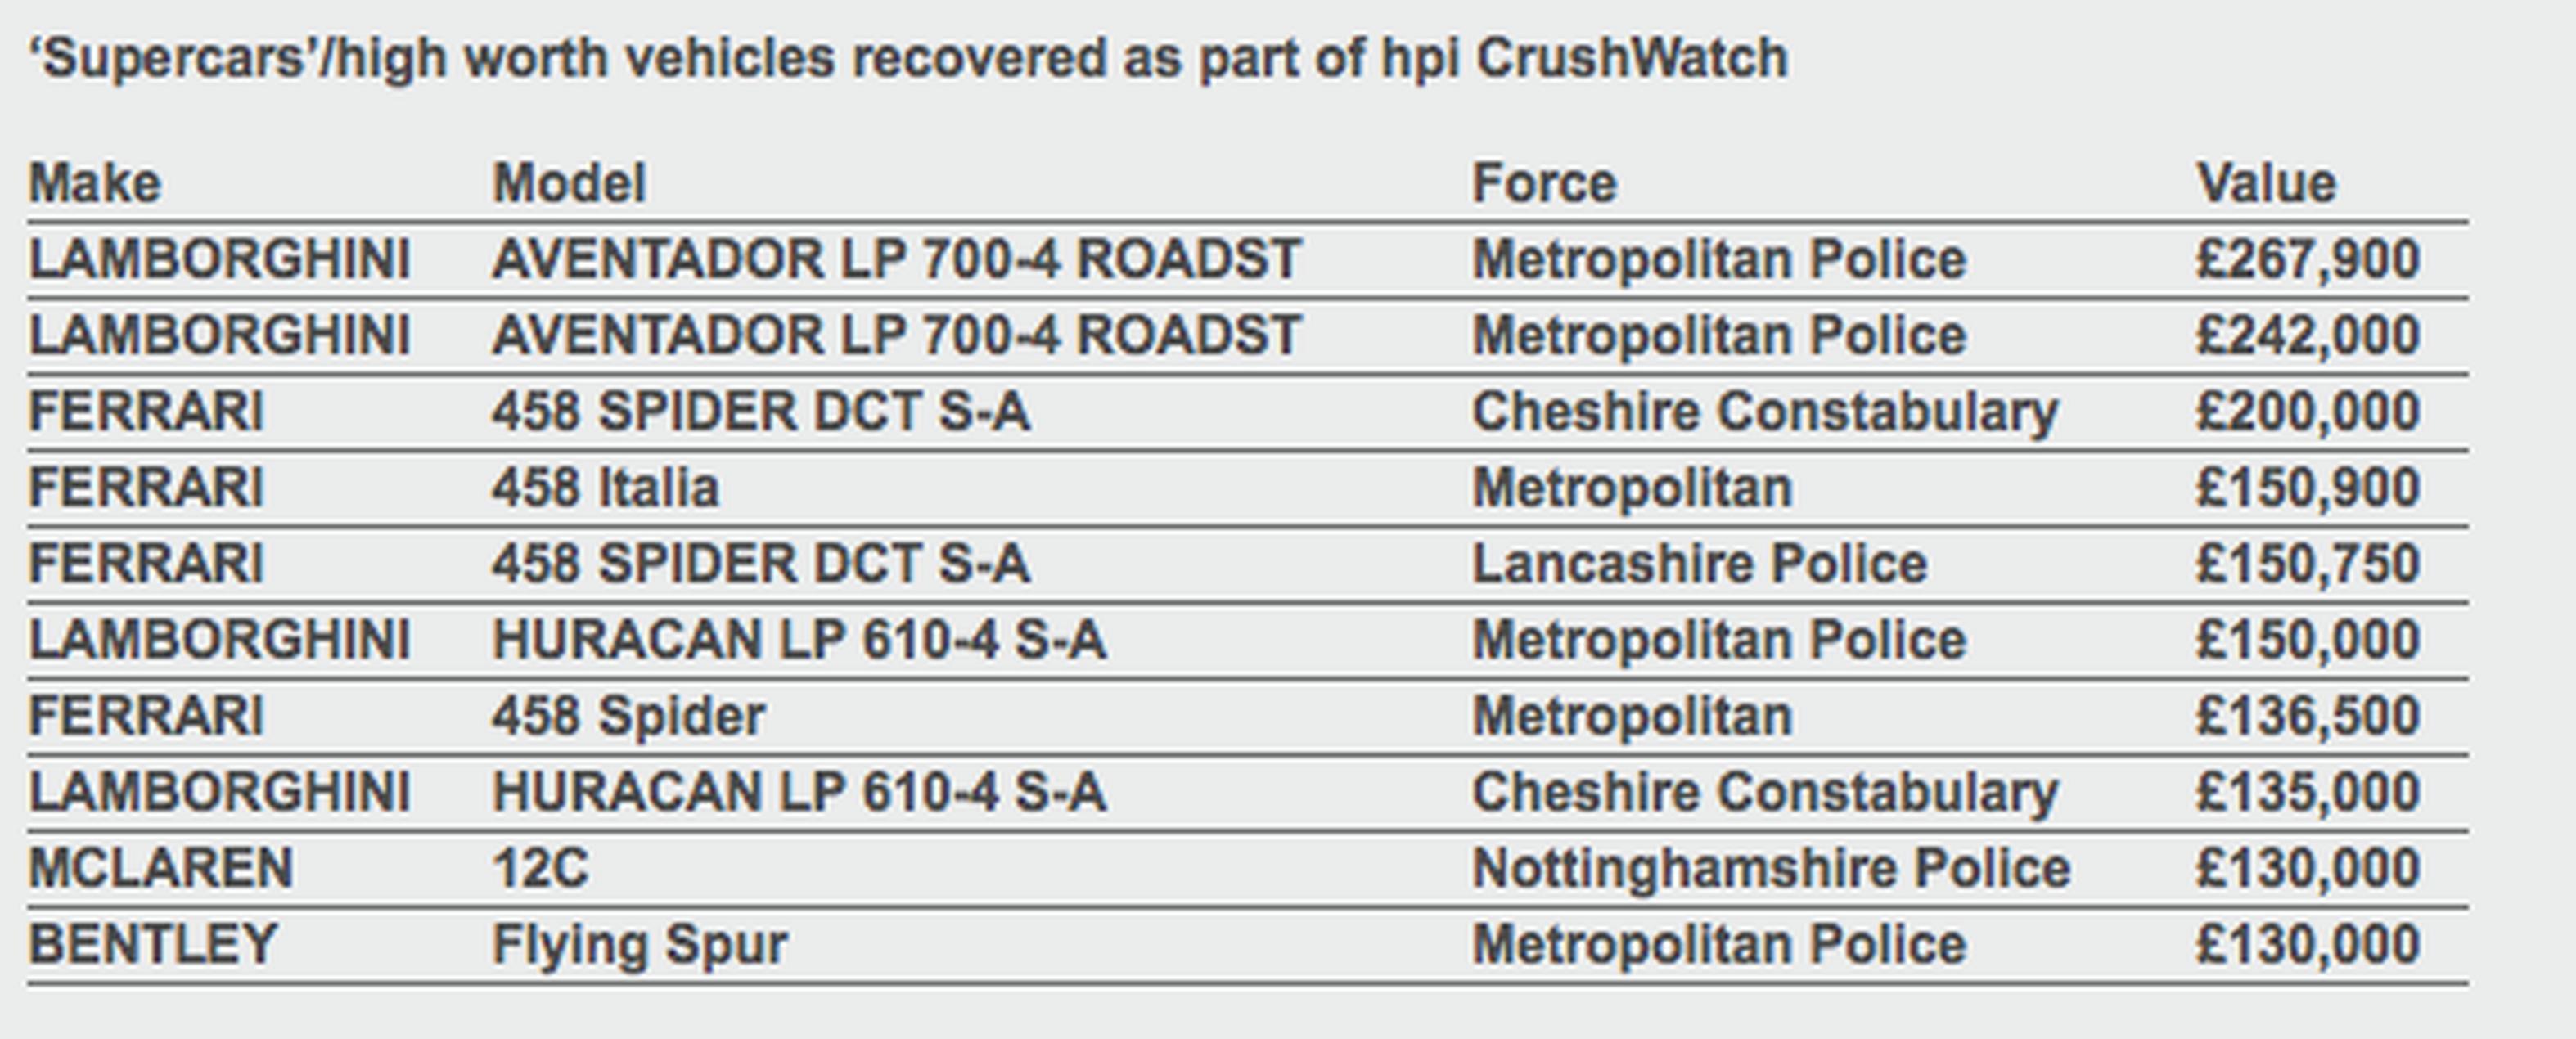 Luxury cars recovered via hpi Crushwatch in 2016